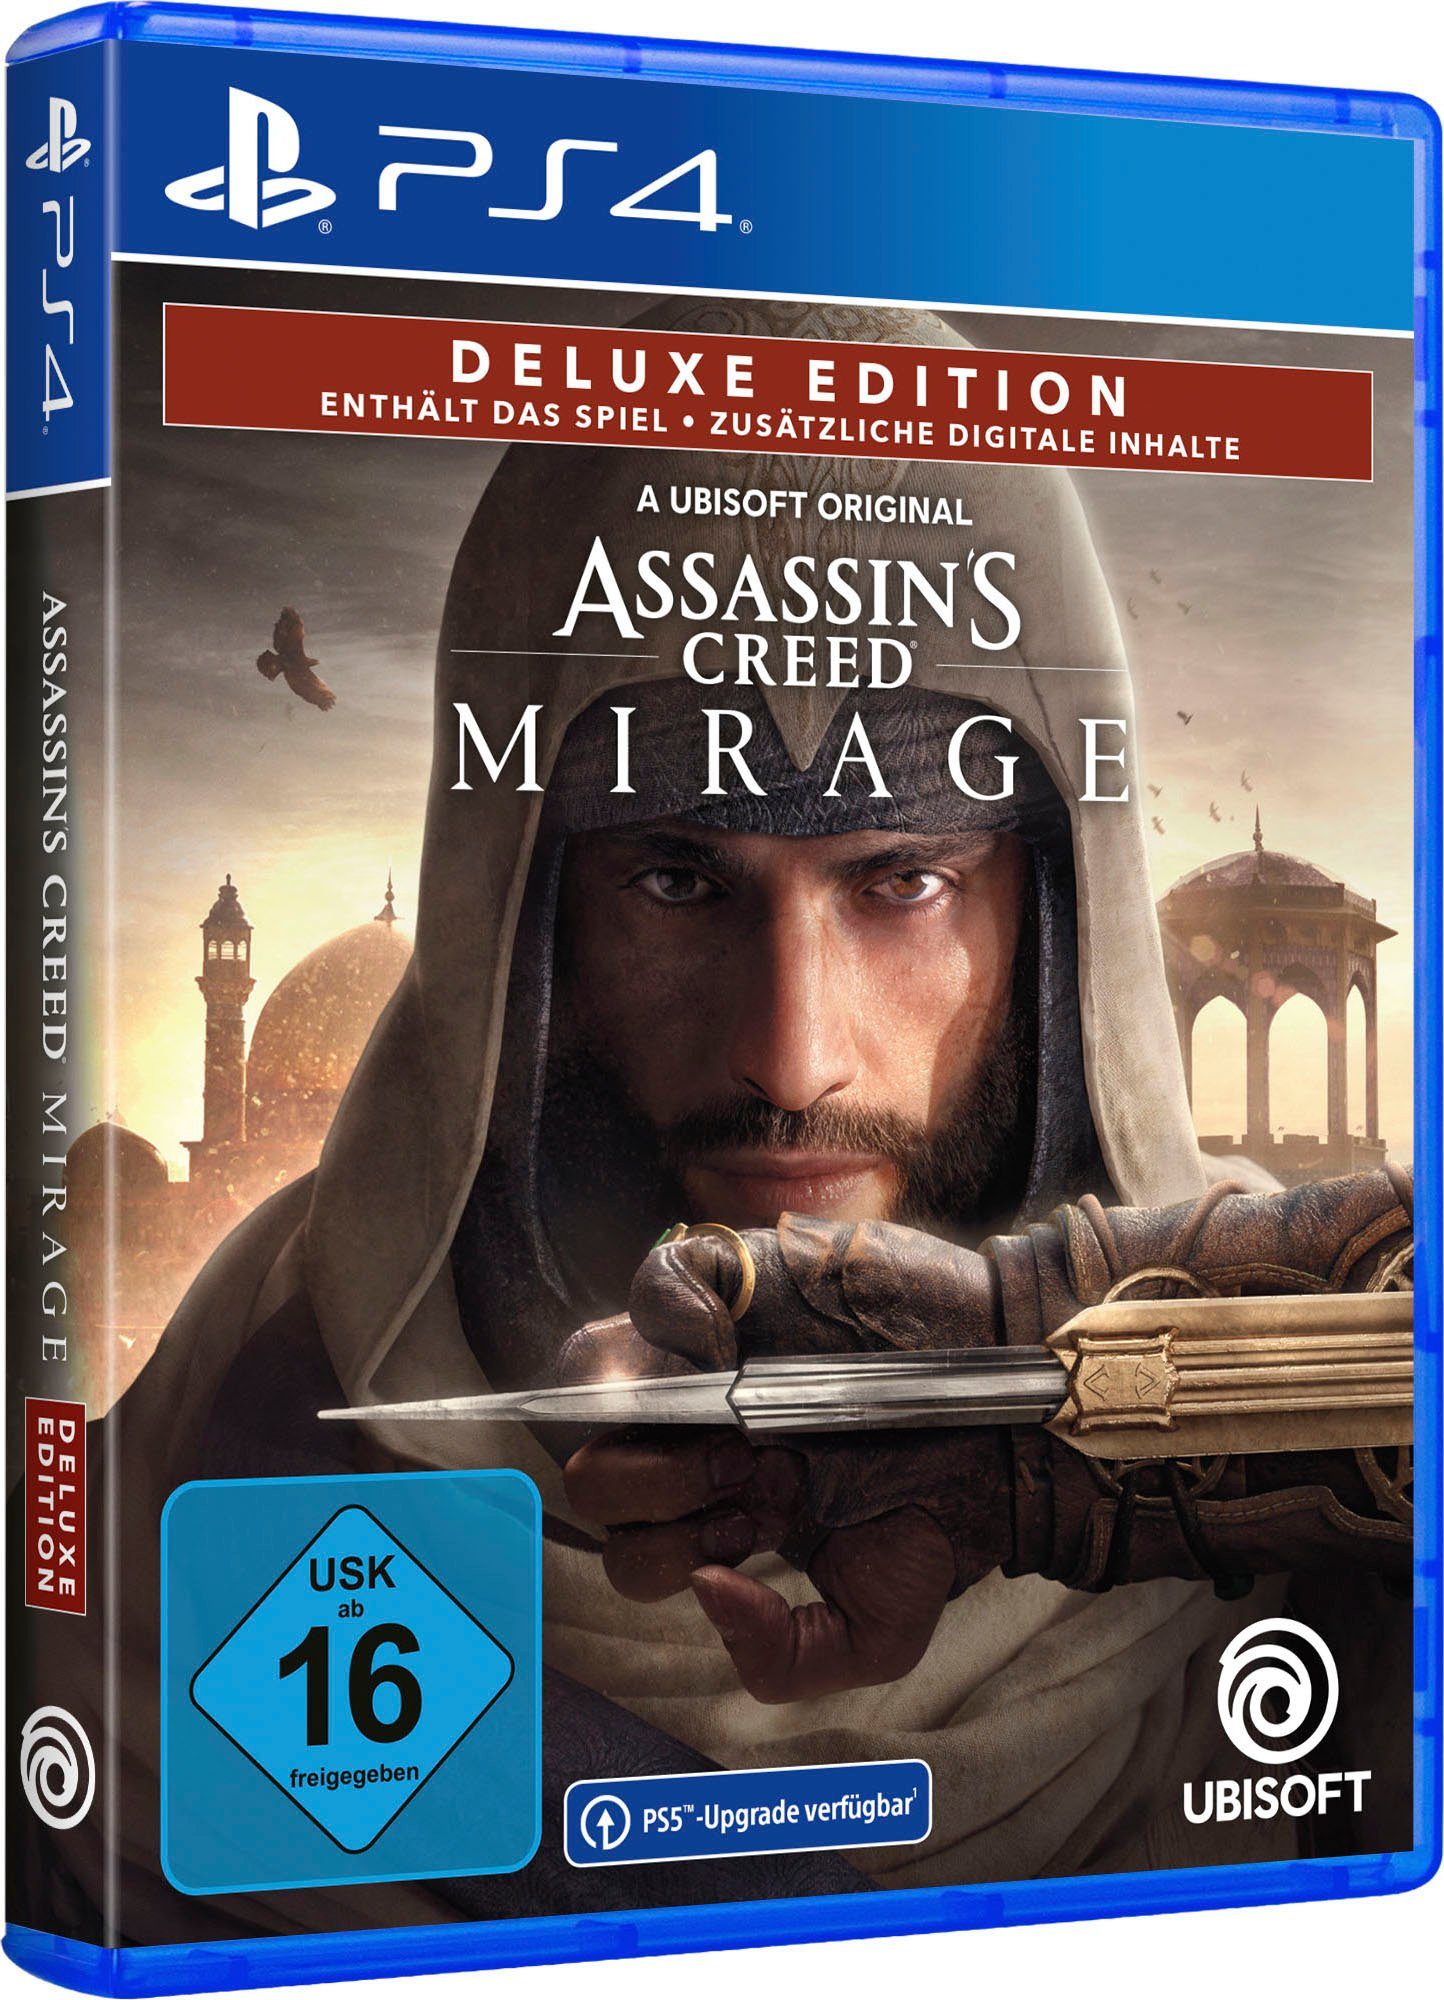 auf (kostenloses Upgrade Mirage Creed Deluxe Edition 4 Assassin's PS5) PlayStation UBISOFT -